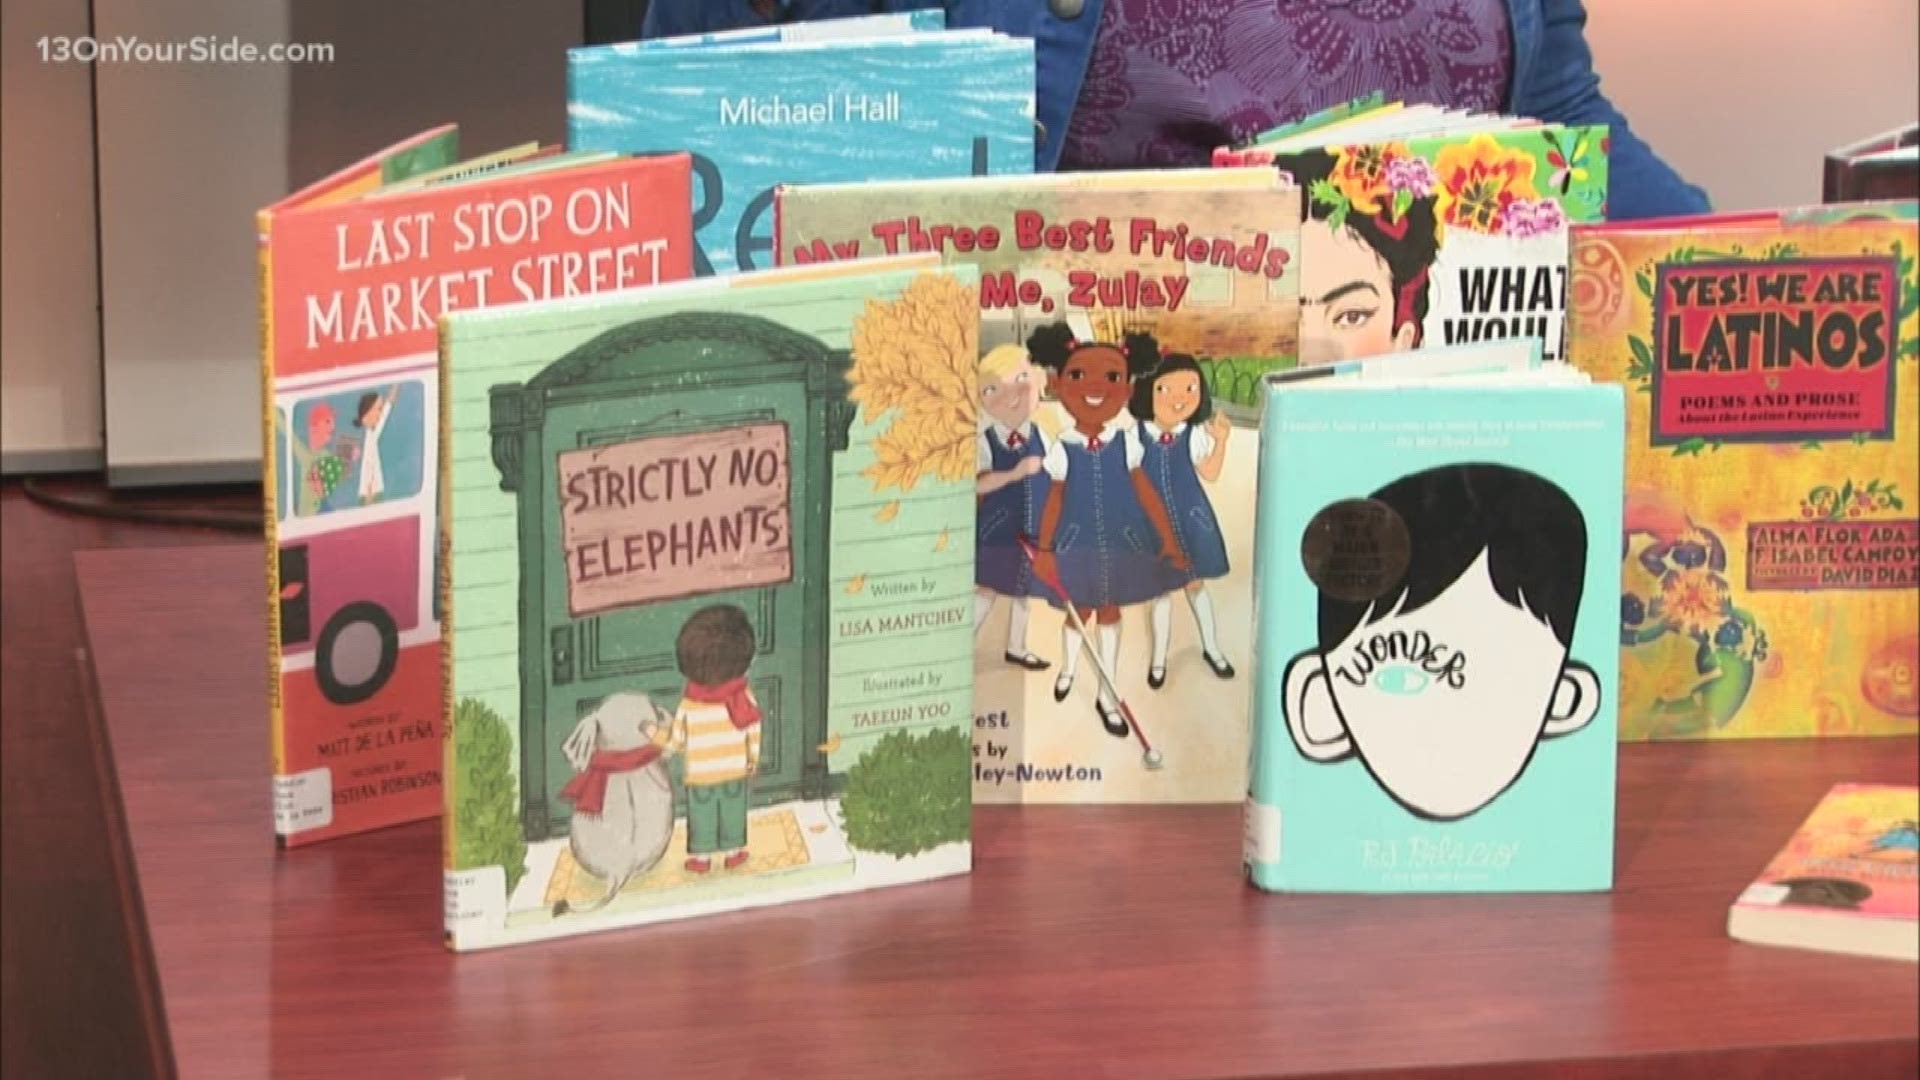 School's out... for a little bit longer, but that doesn't mean the learning can't start right now. The Grand Rapids Public Library is offering a fun way to sharpen your reading skills.